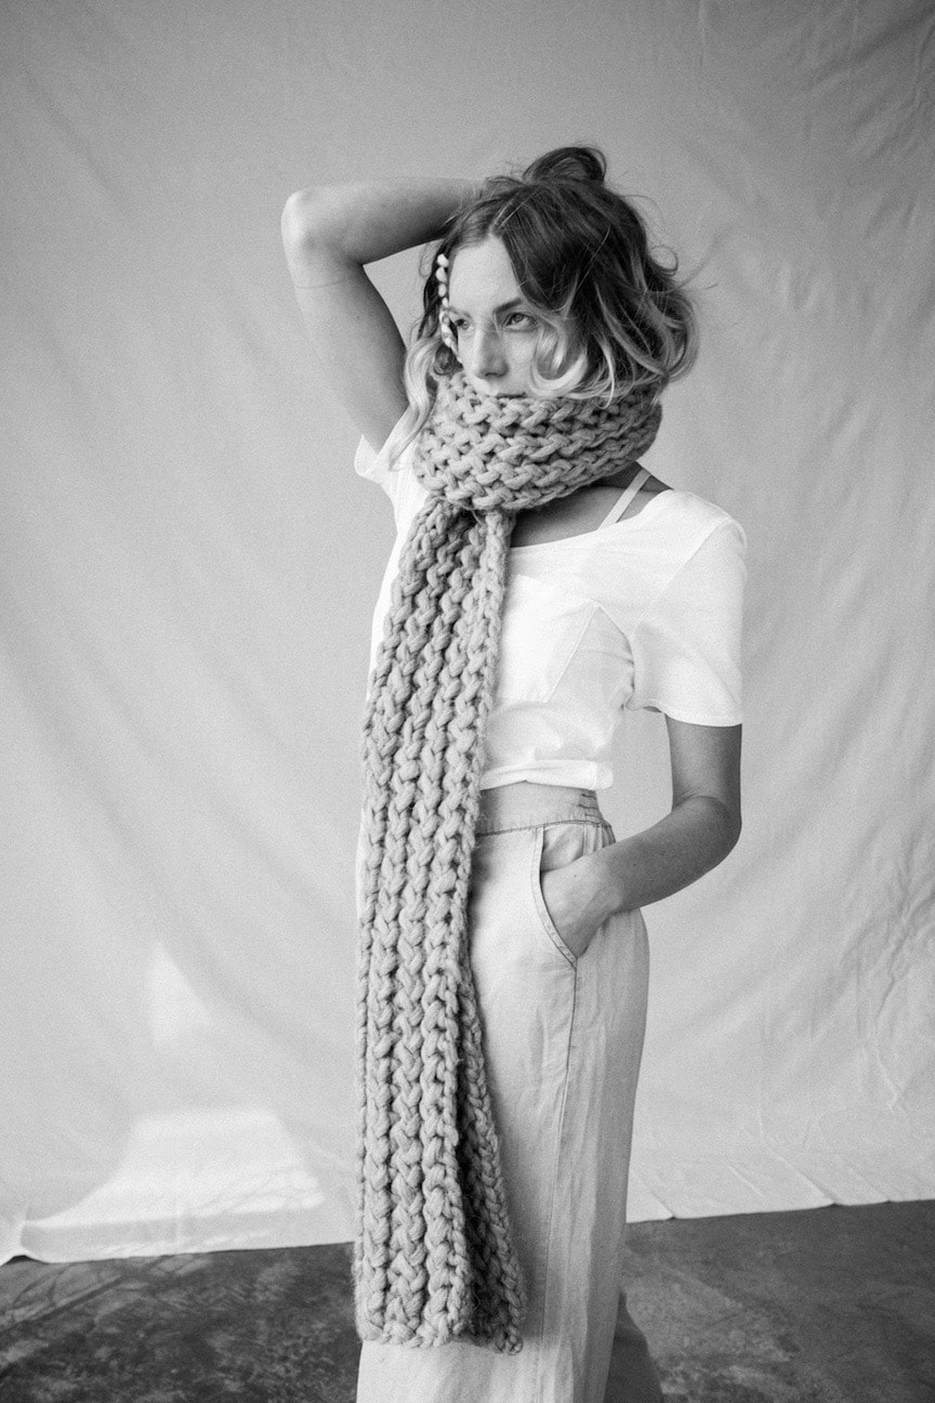 The LANE scarf is part of the zed | custom program - a hand knit scarf made especially for you